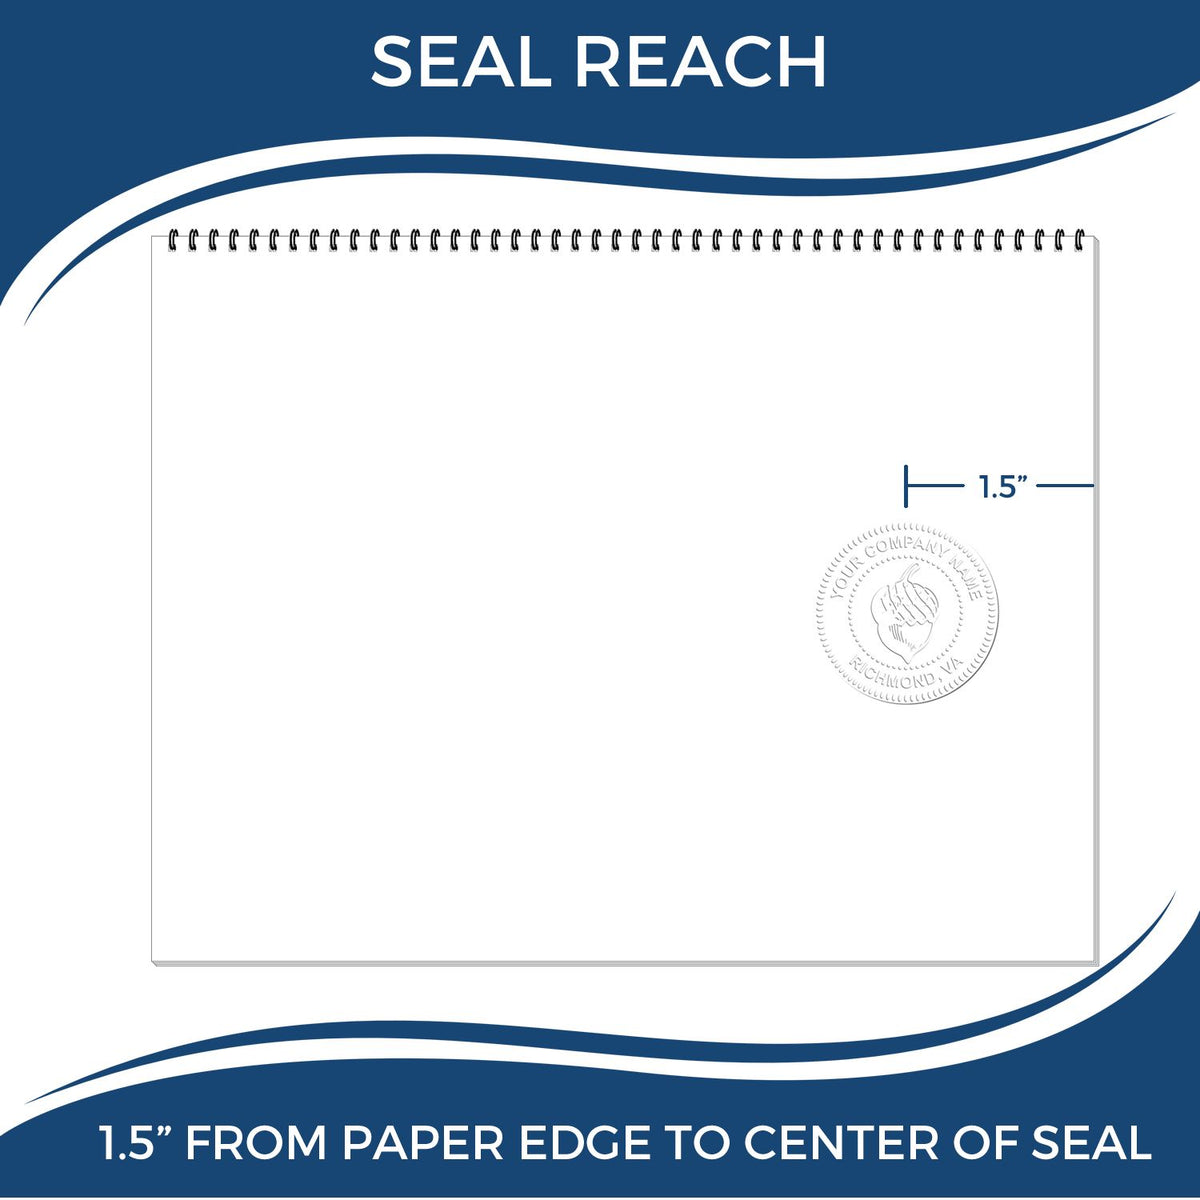 An infographic showing the seal reach which is represented by a ruler and a miniature seal image of the Soft South Carolina Professional Geologist Seal